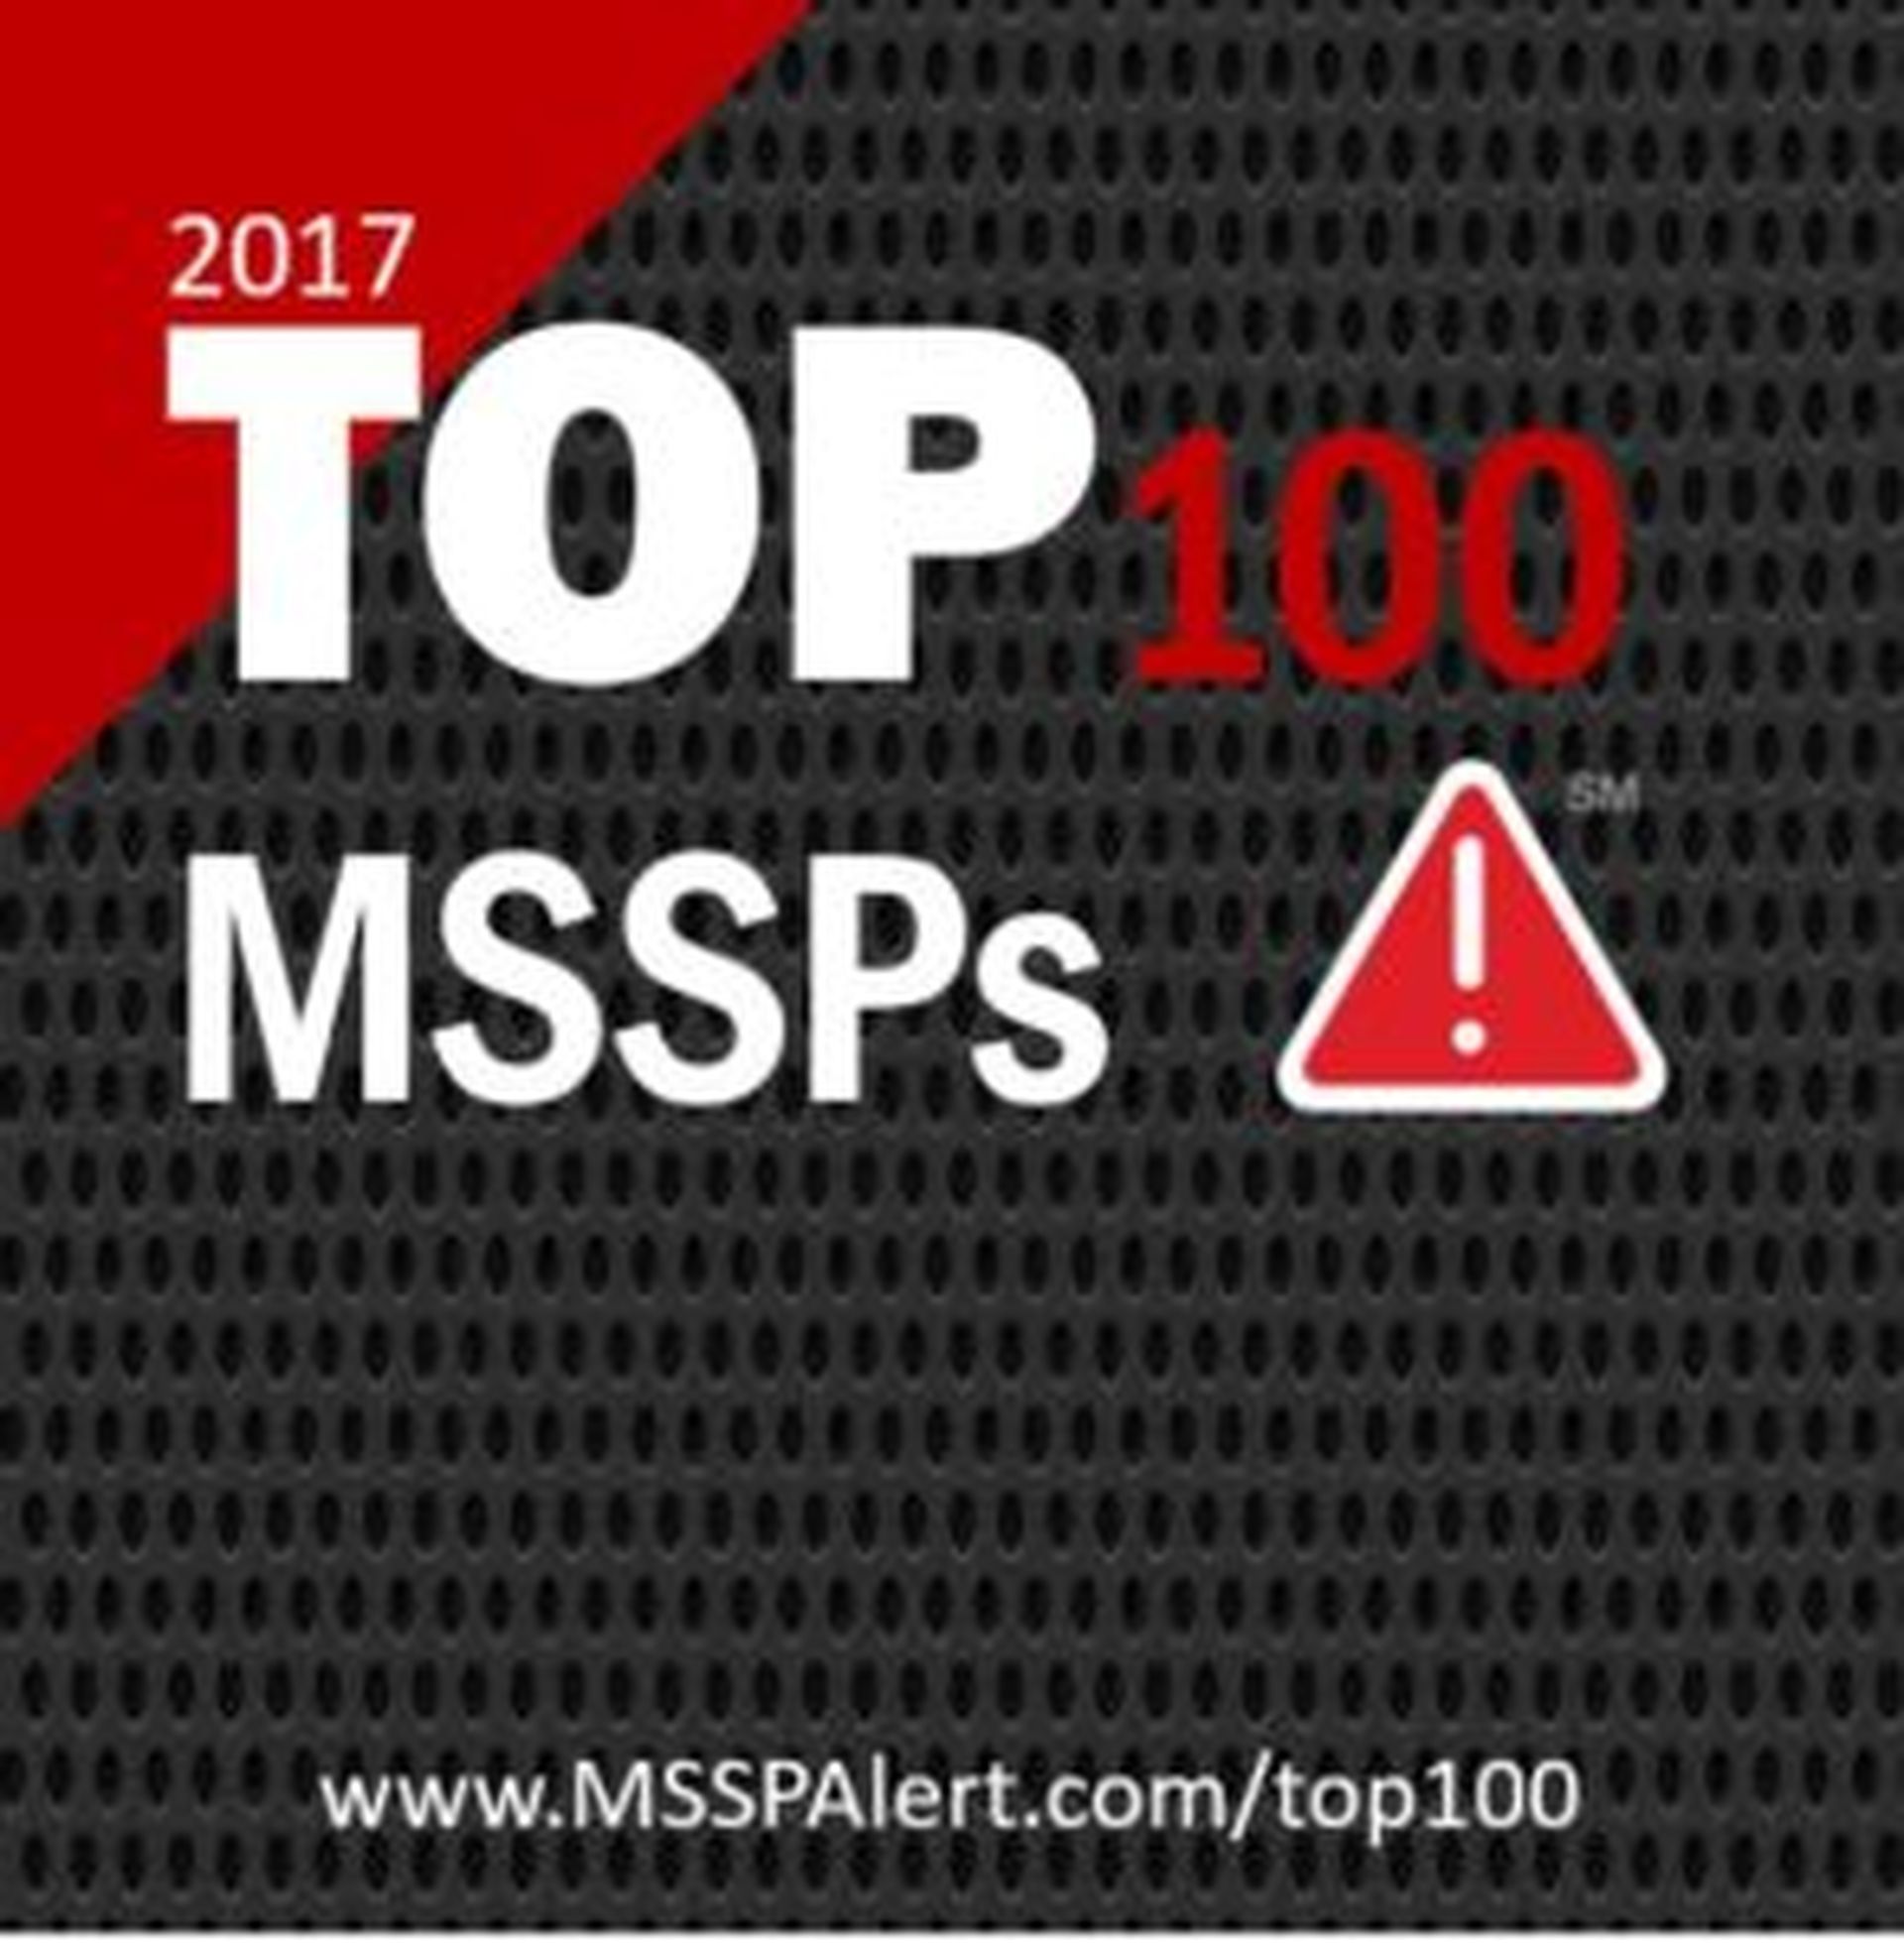 Related: The Top 100 MSSPs for 2017